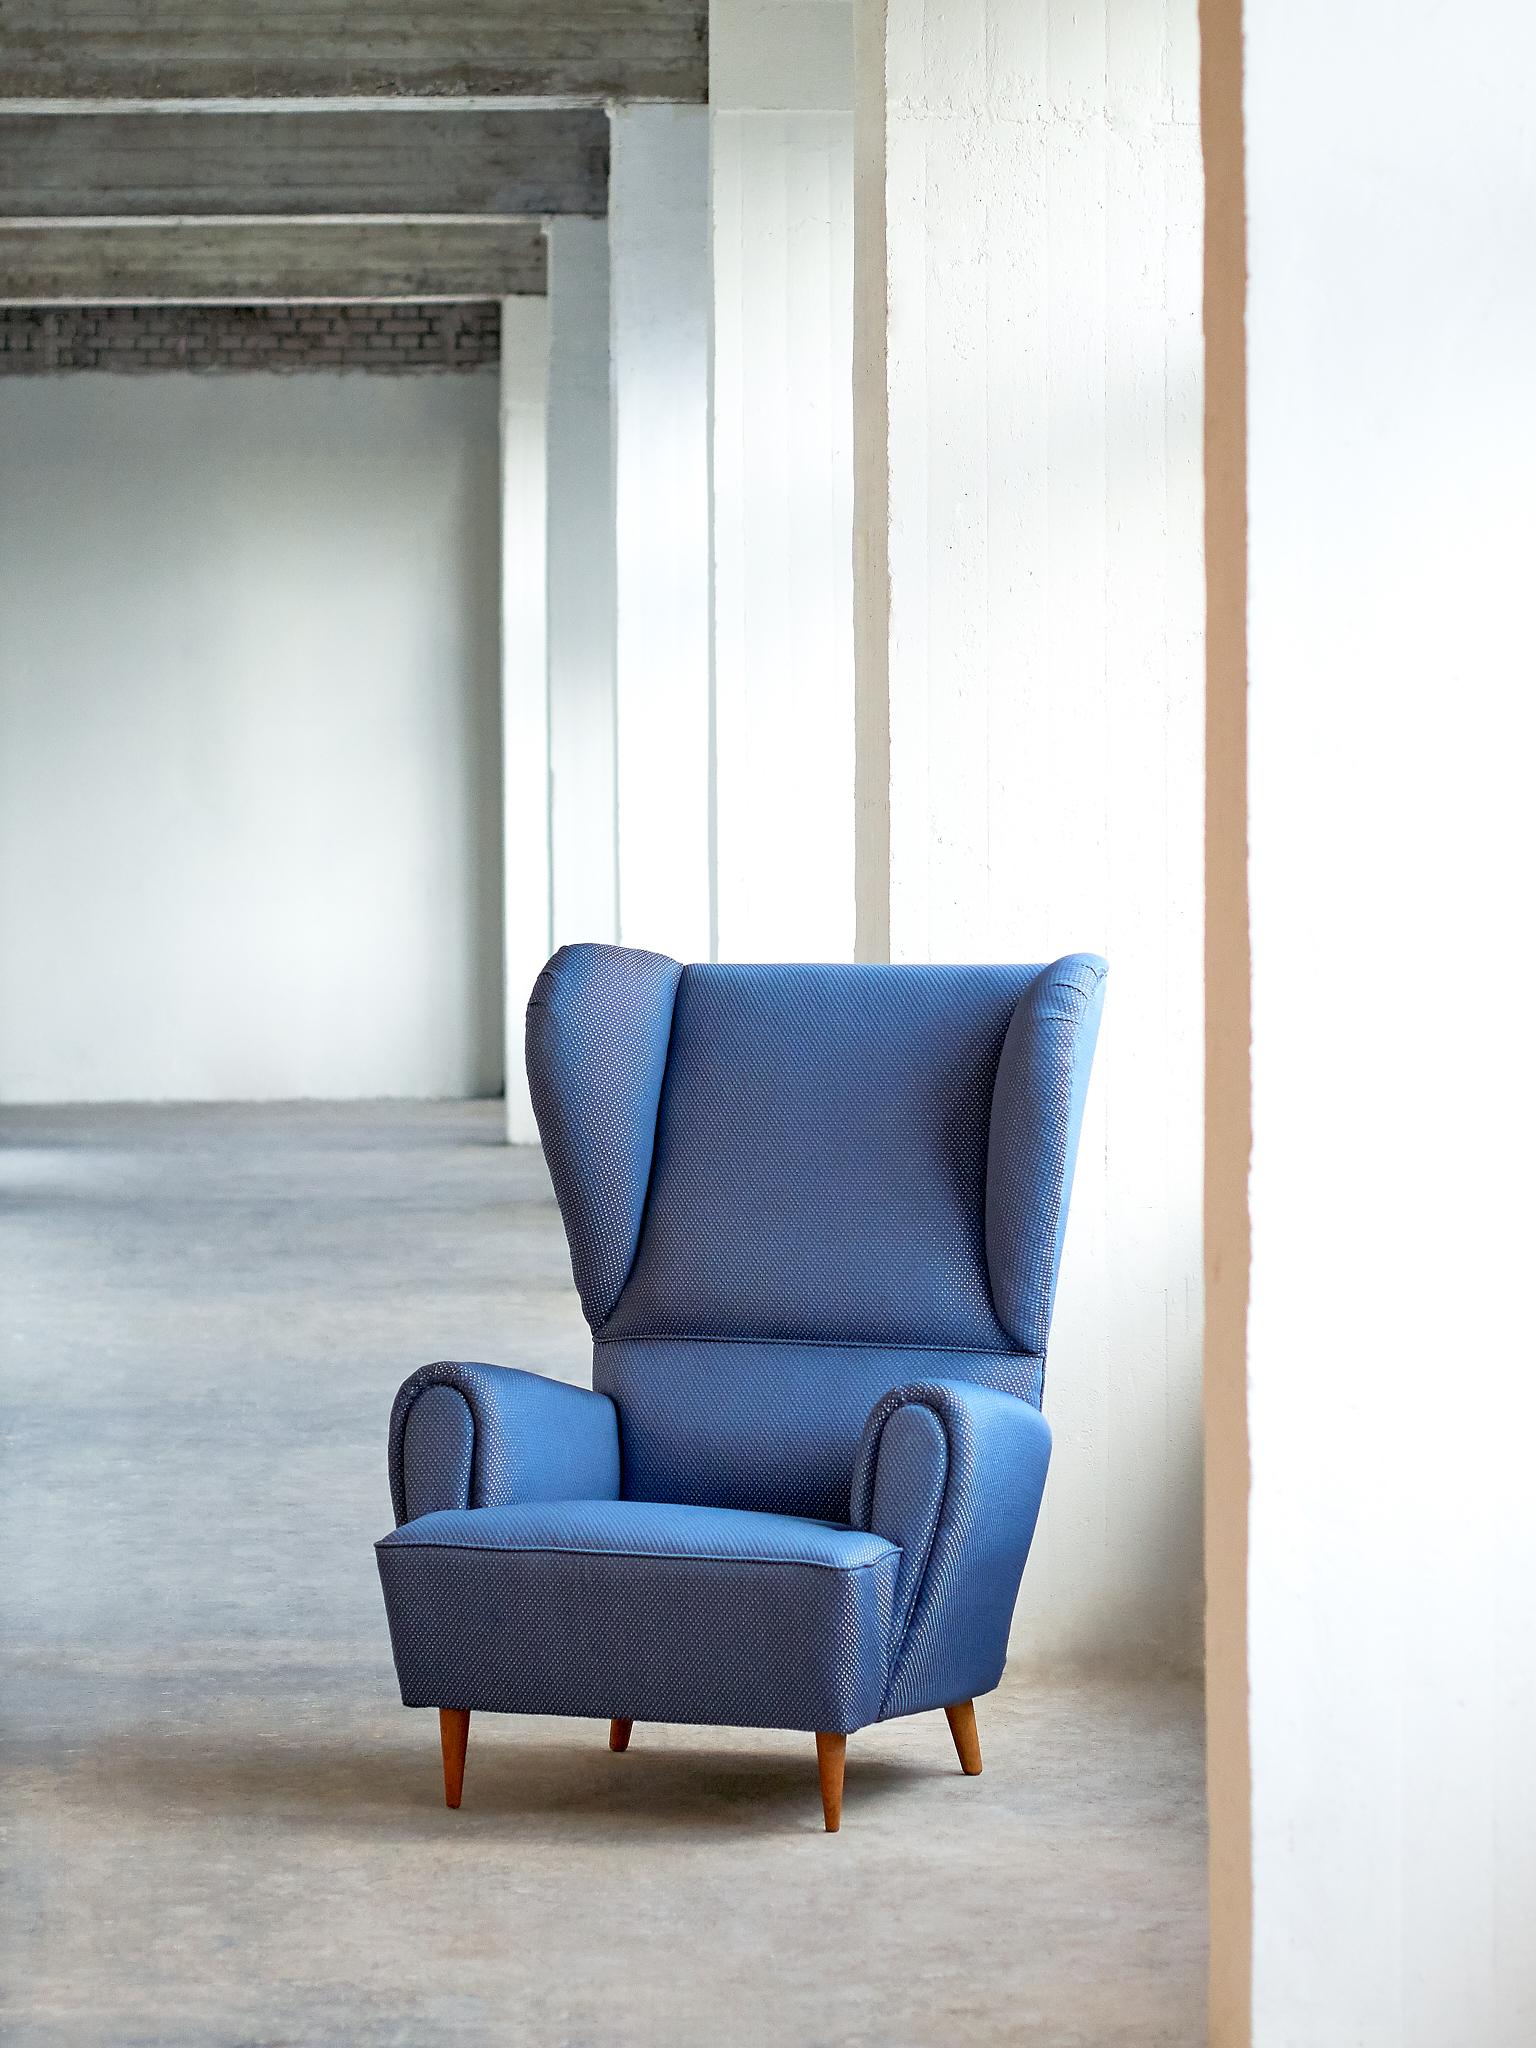 This generously sized wingback chair by Paolo Buffa has a grand yet playful design. Paolo Buffa is known for his modern interpretation of classical design, in which dimensions and proportions are transformed into refined and exciting new shapes. The